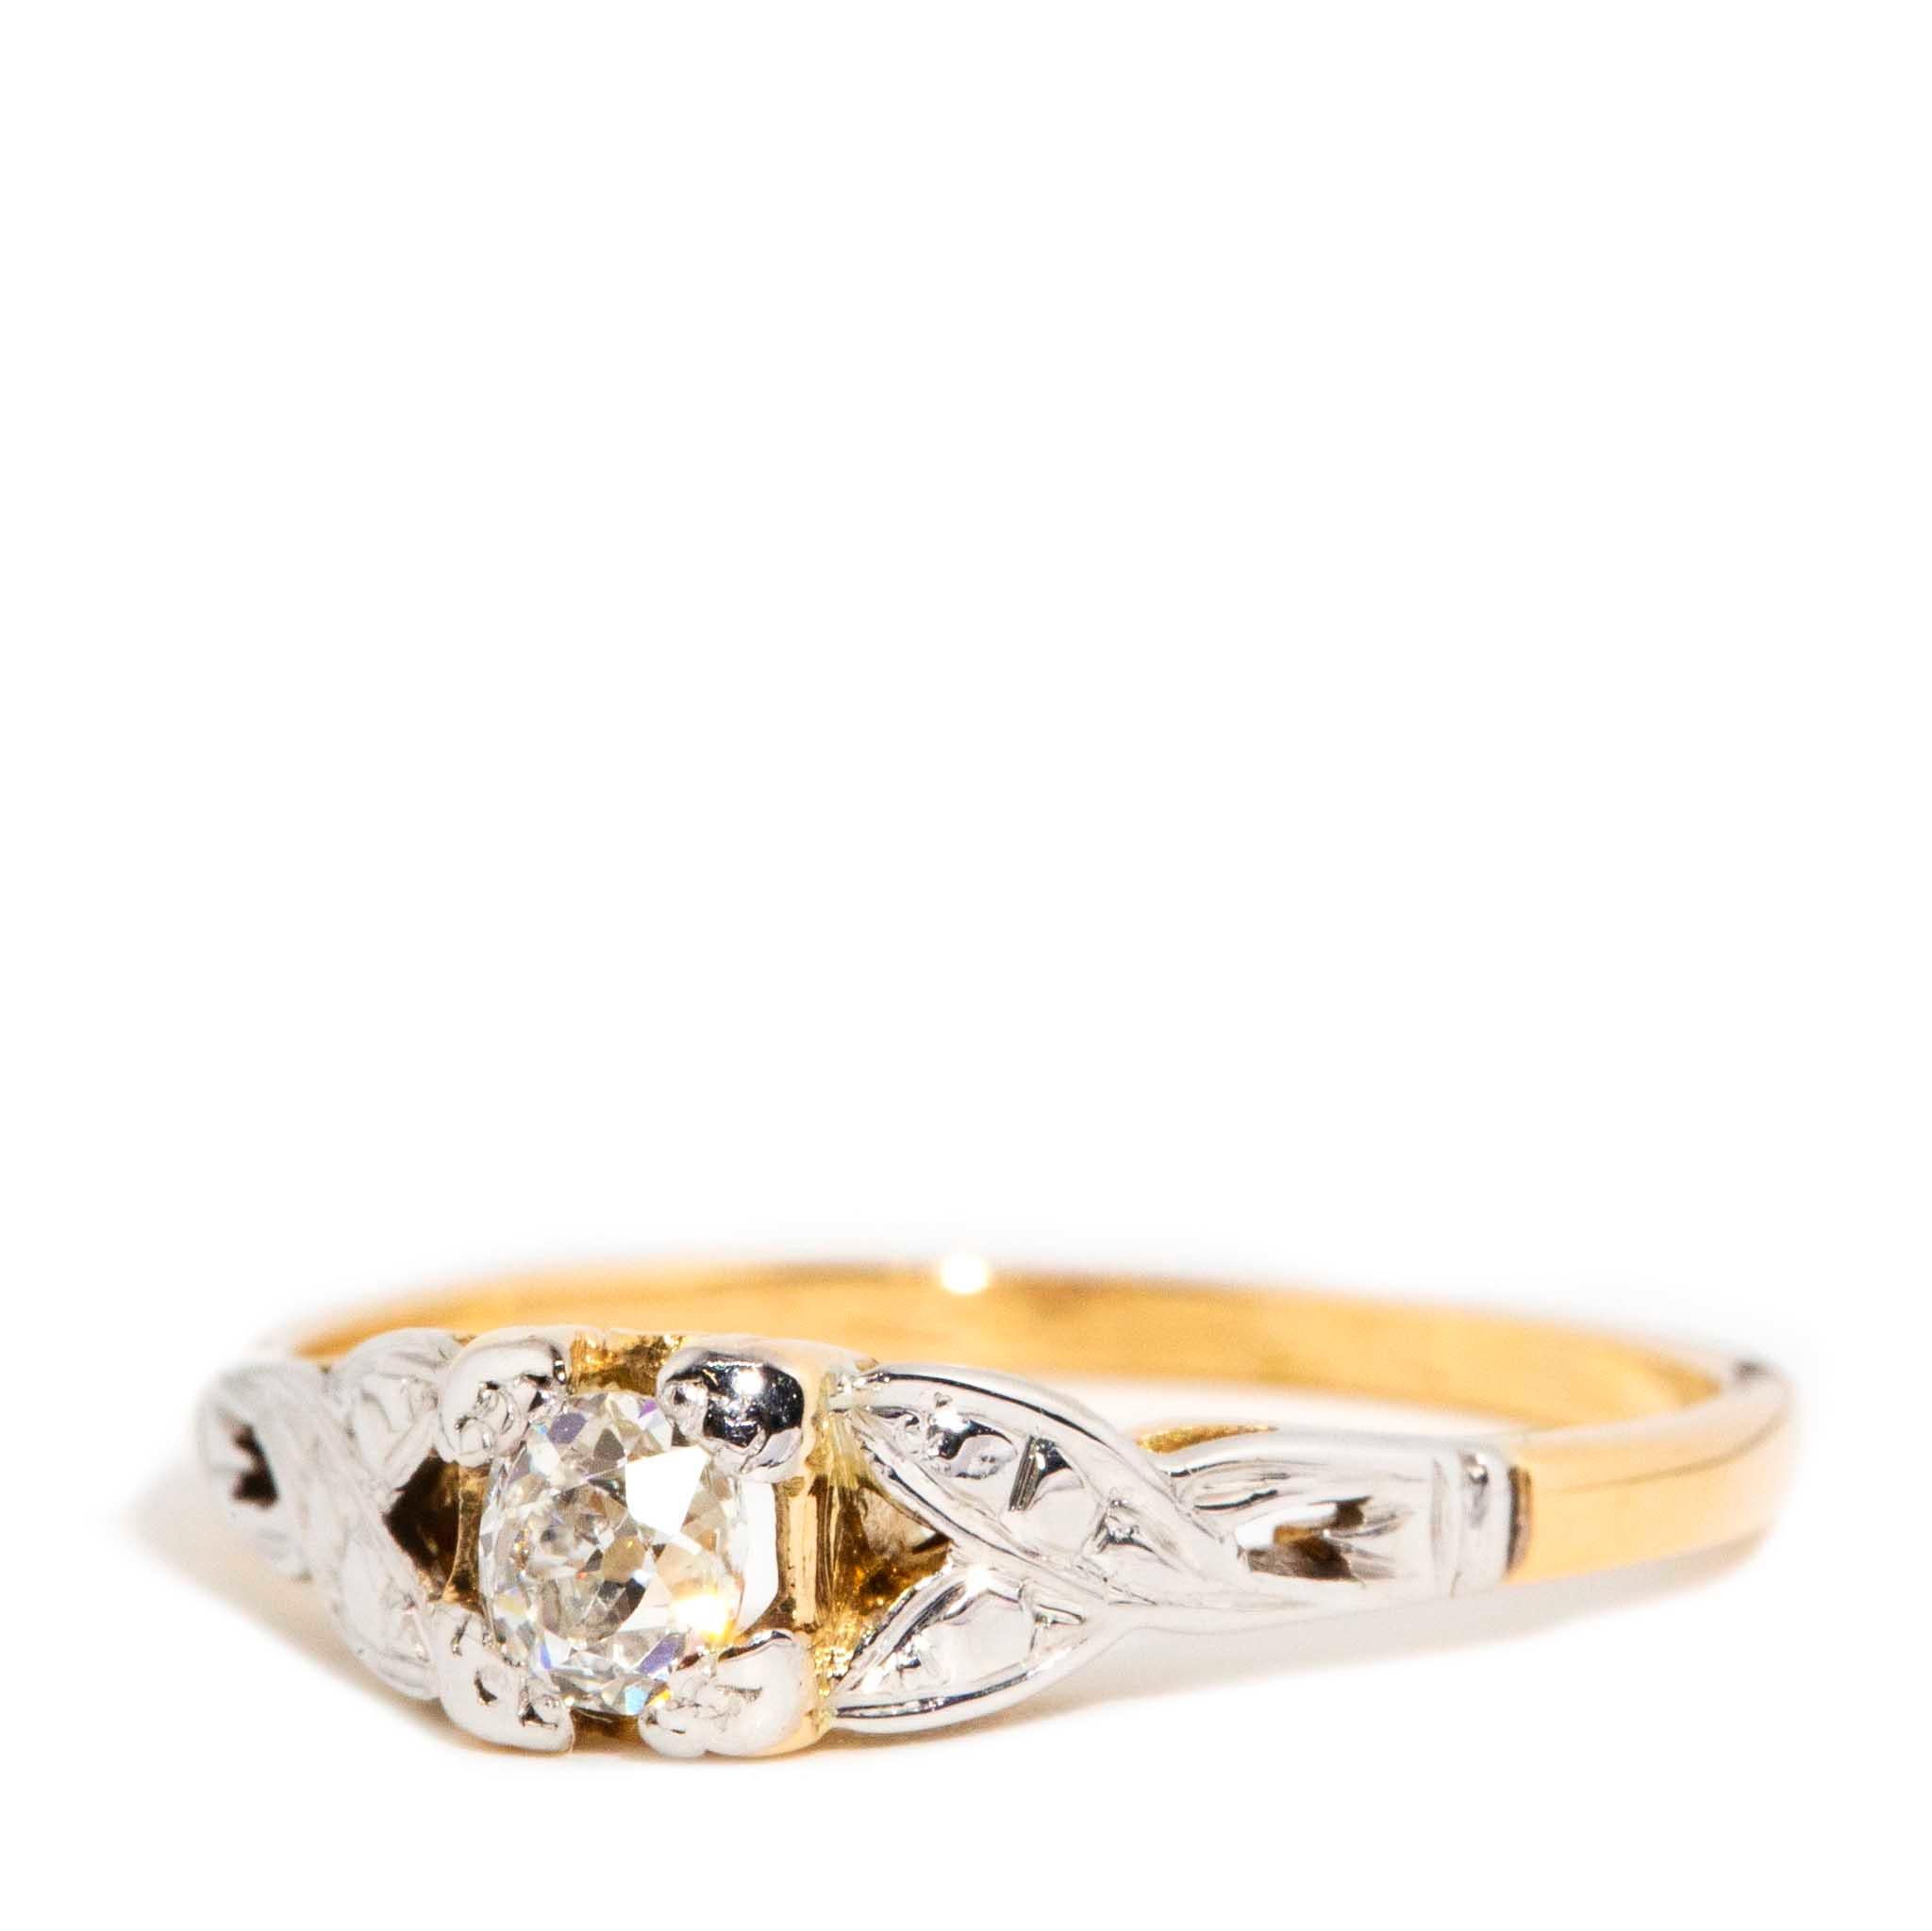 Old European Cut Vintage Circa 1930s Old Cut Diamond Solitaire Ring 15 Carat Yellow & White Gold For Sale